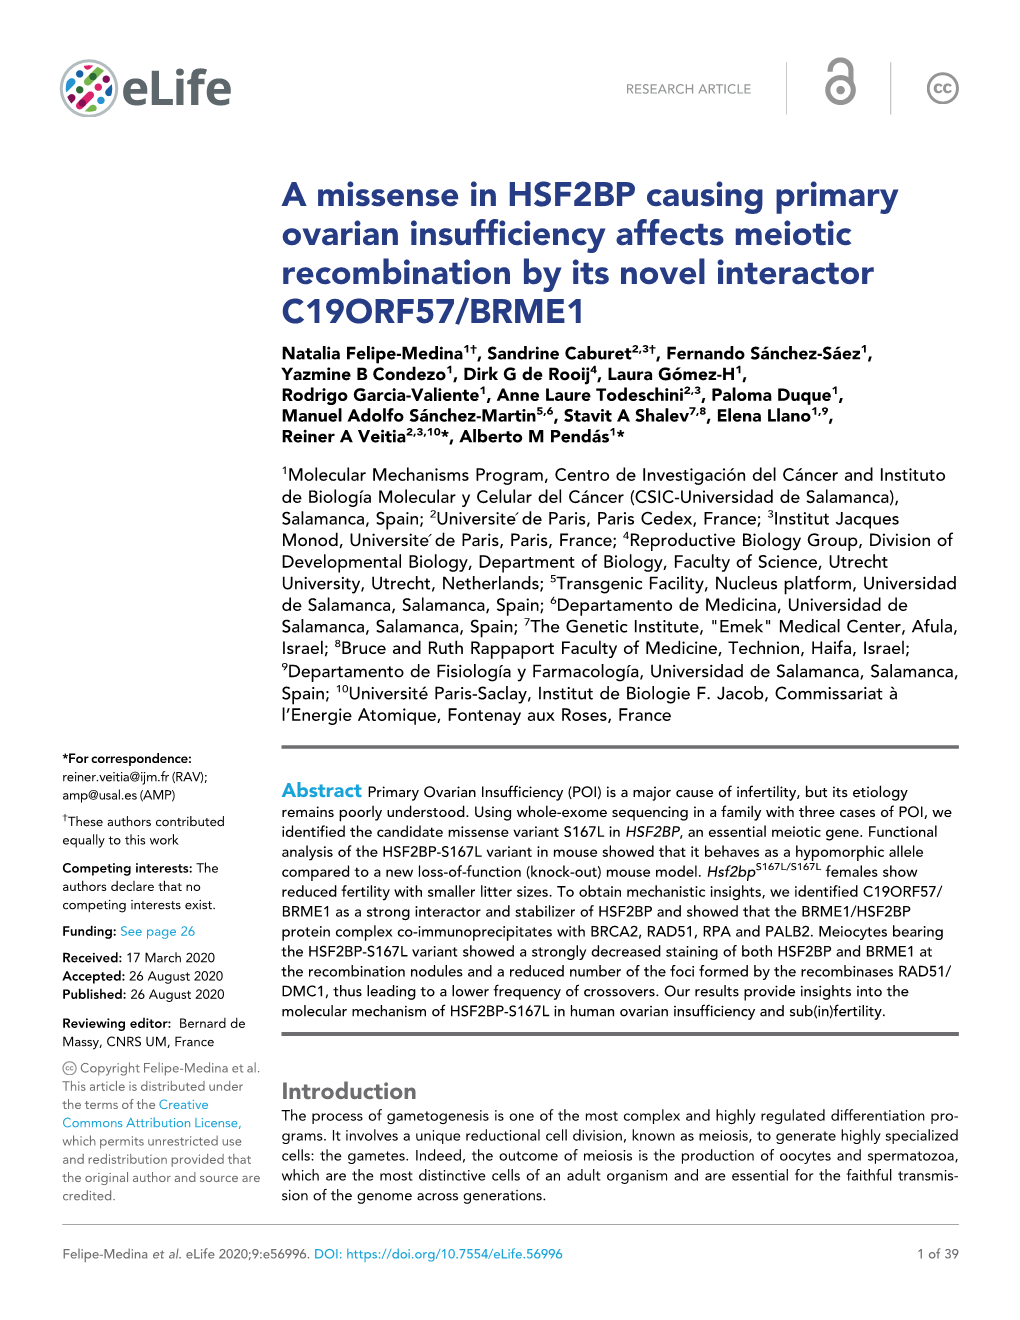 A Missense in HSF2BP Causing Primary Ovarian Insufficiency Affects